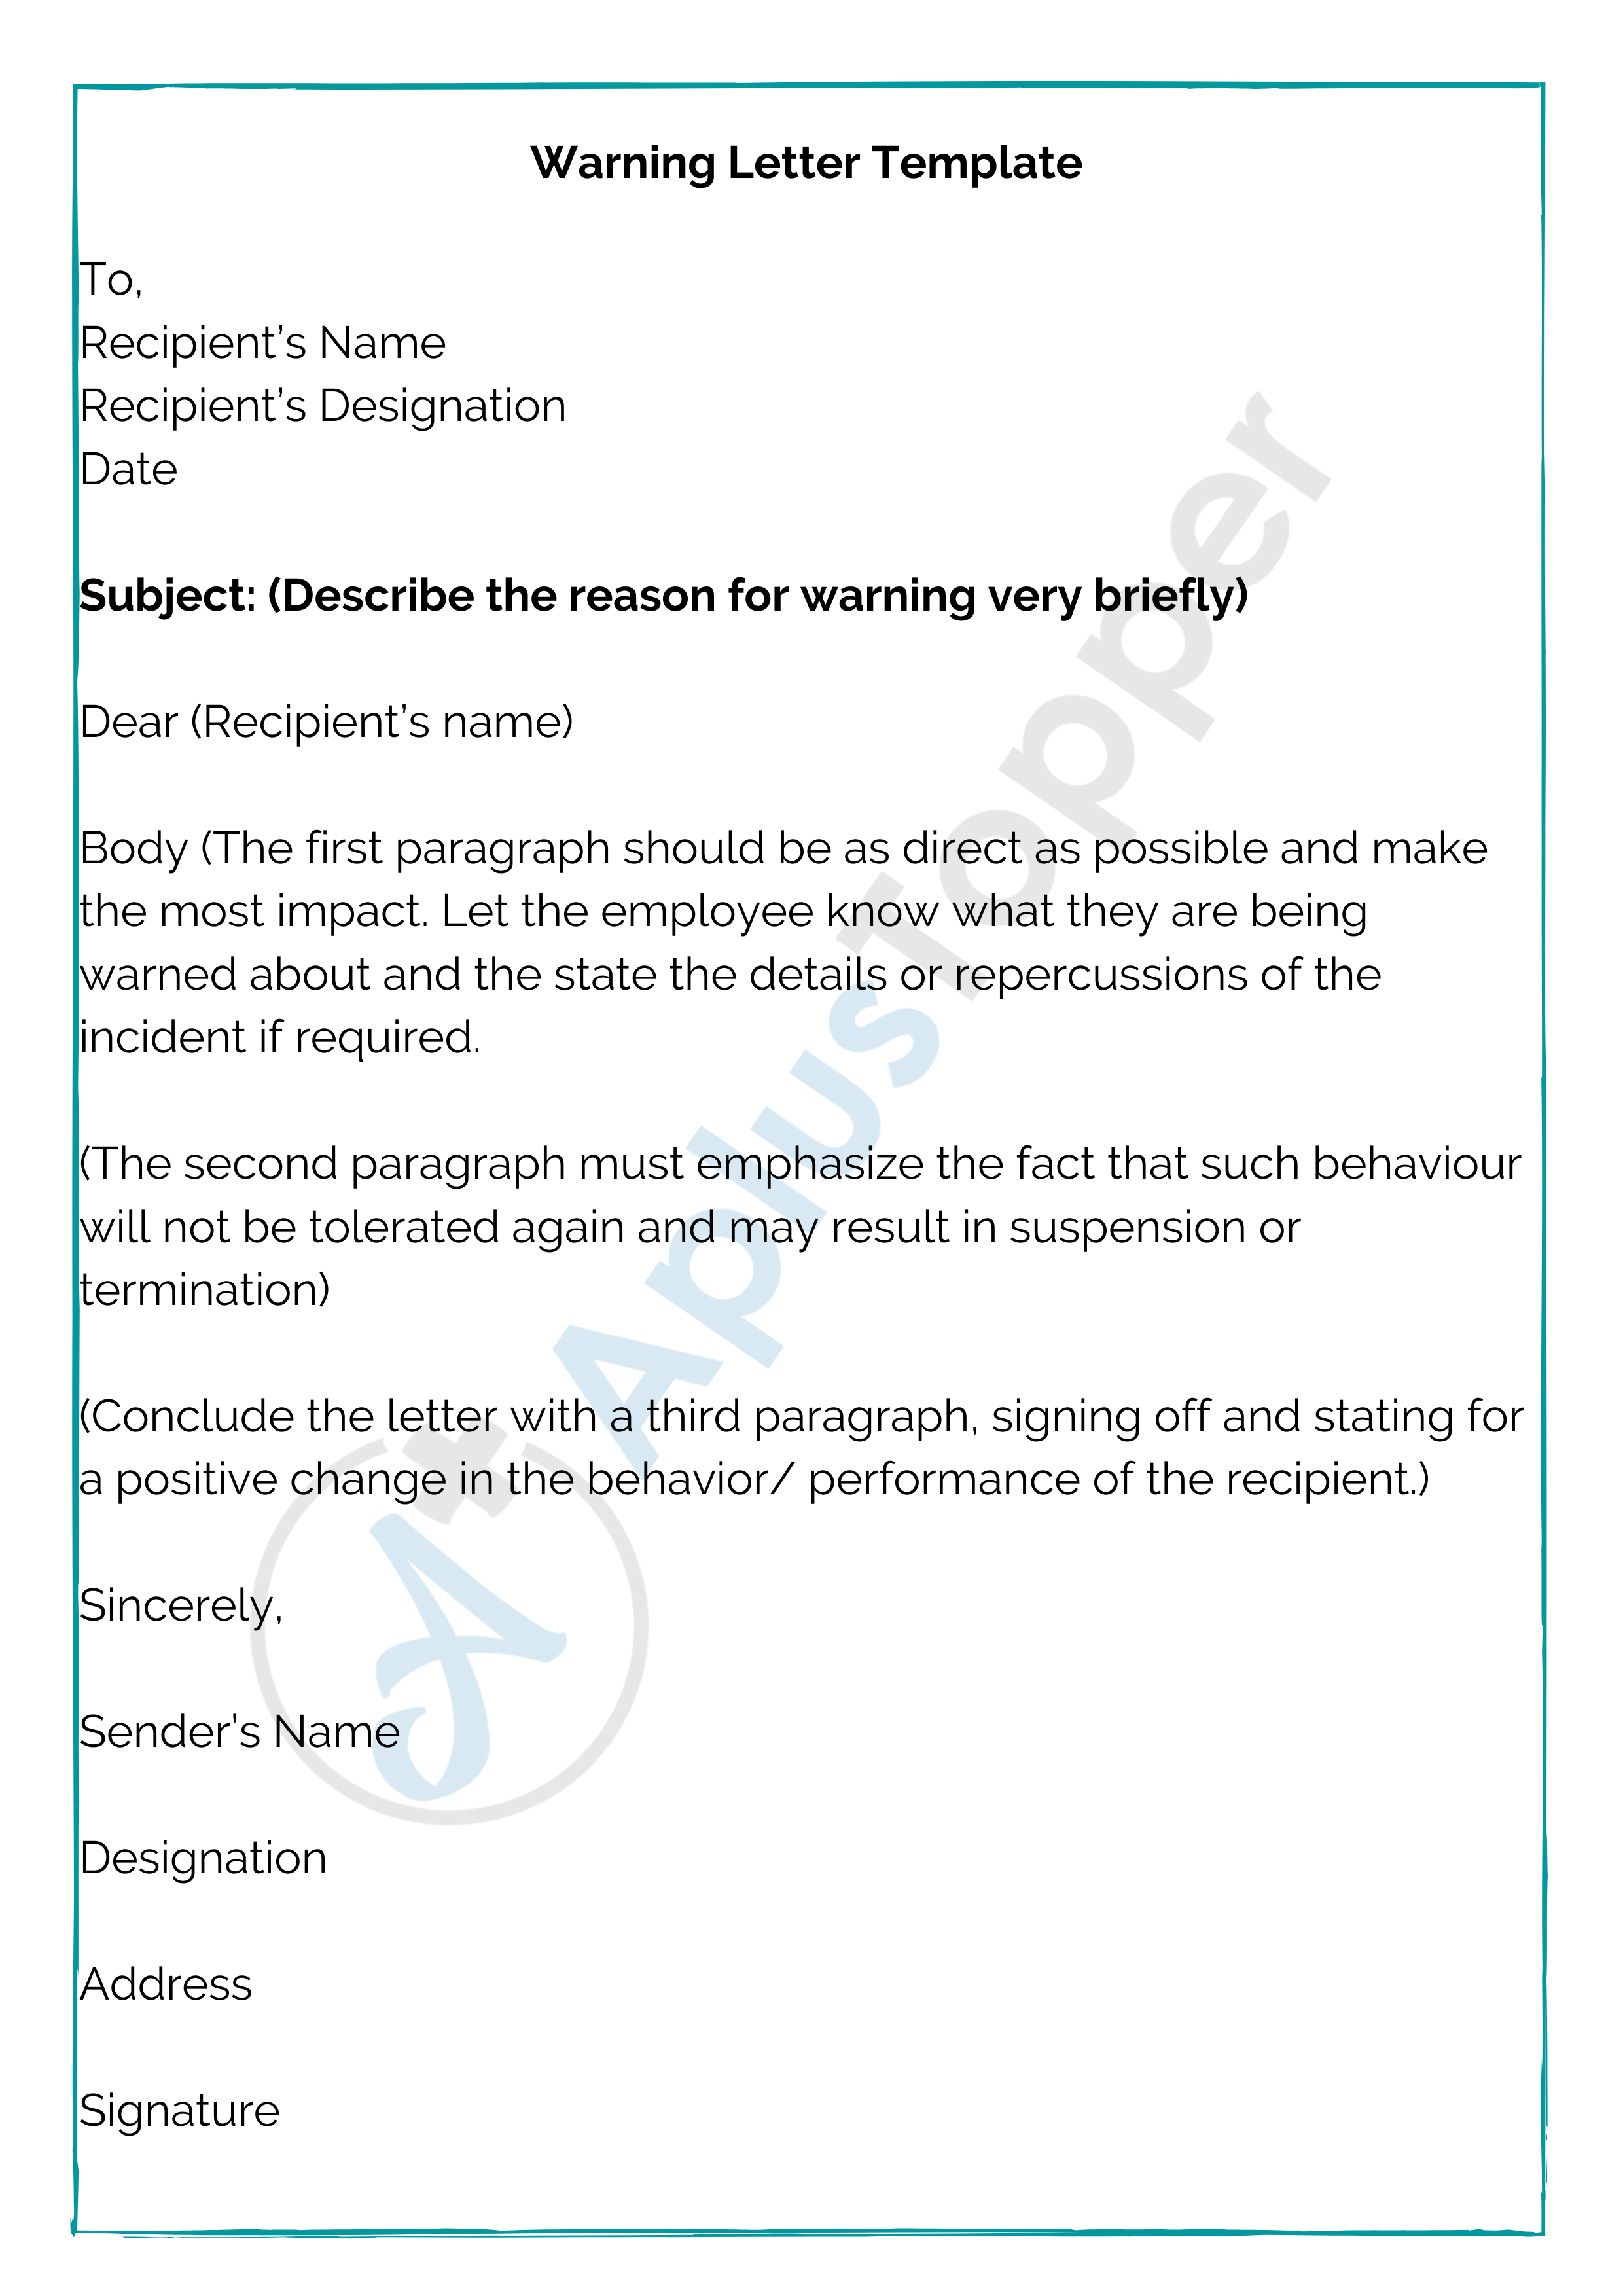 Warning Letter | How To Write a Warning Letter?, Template, Samples - A ...